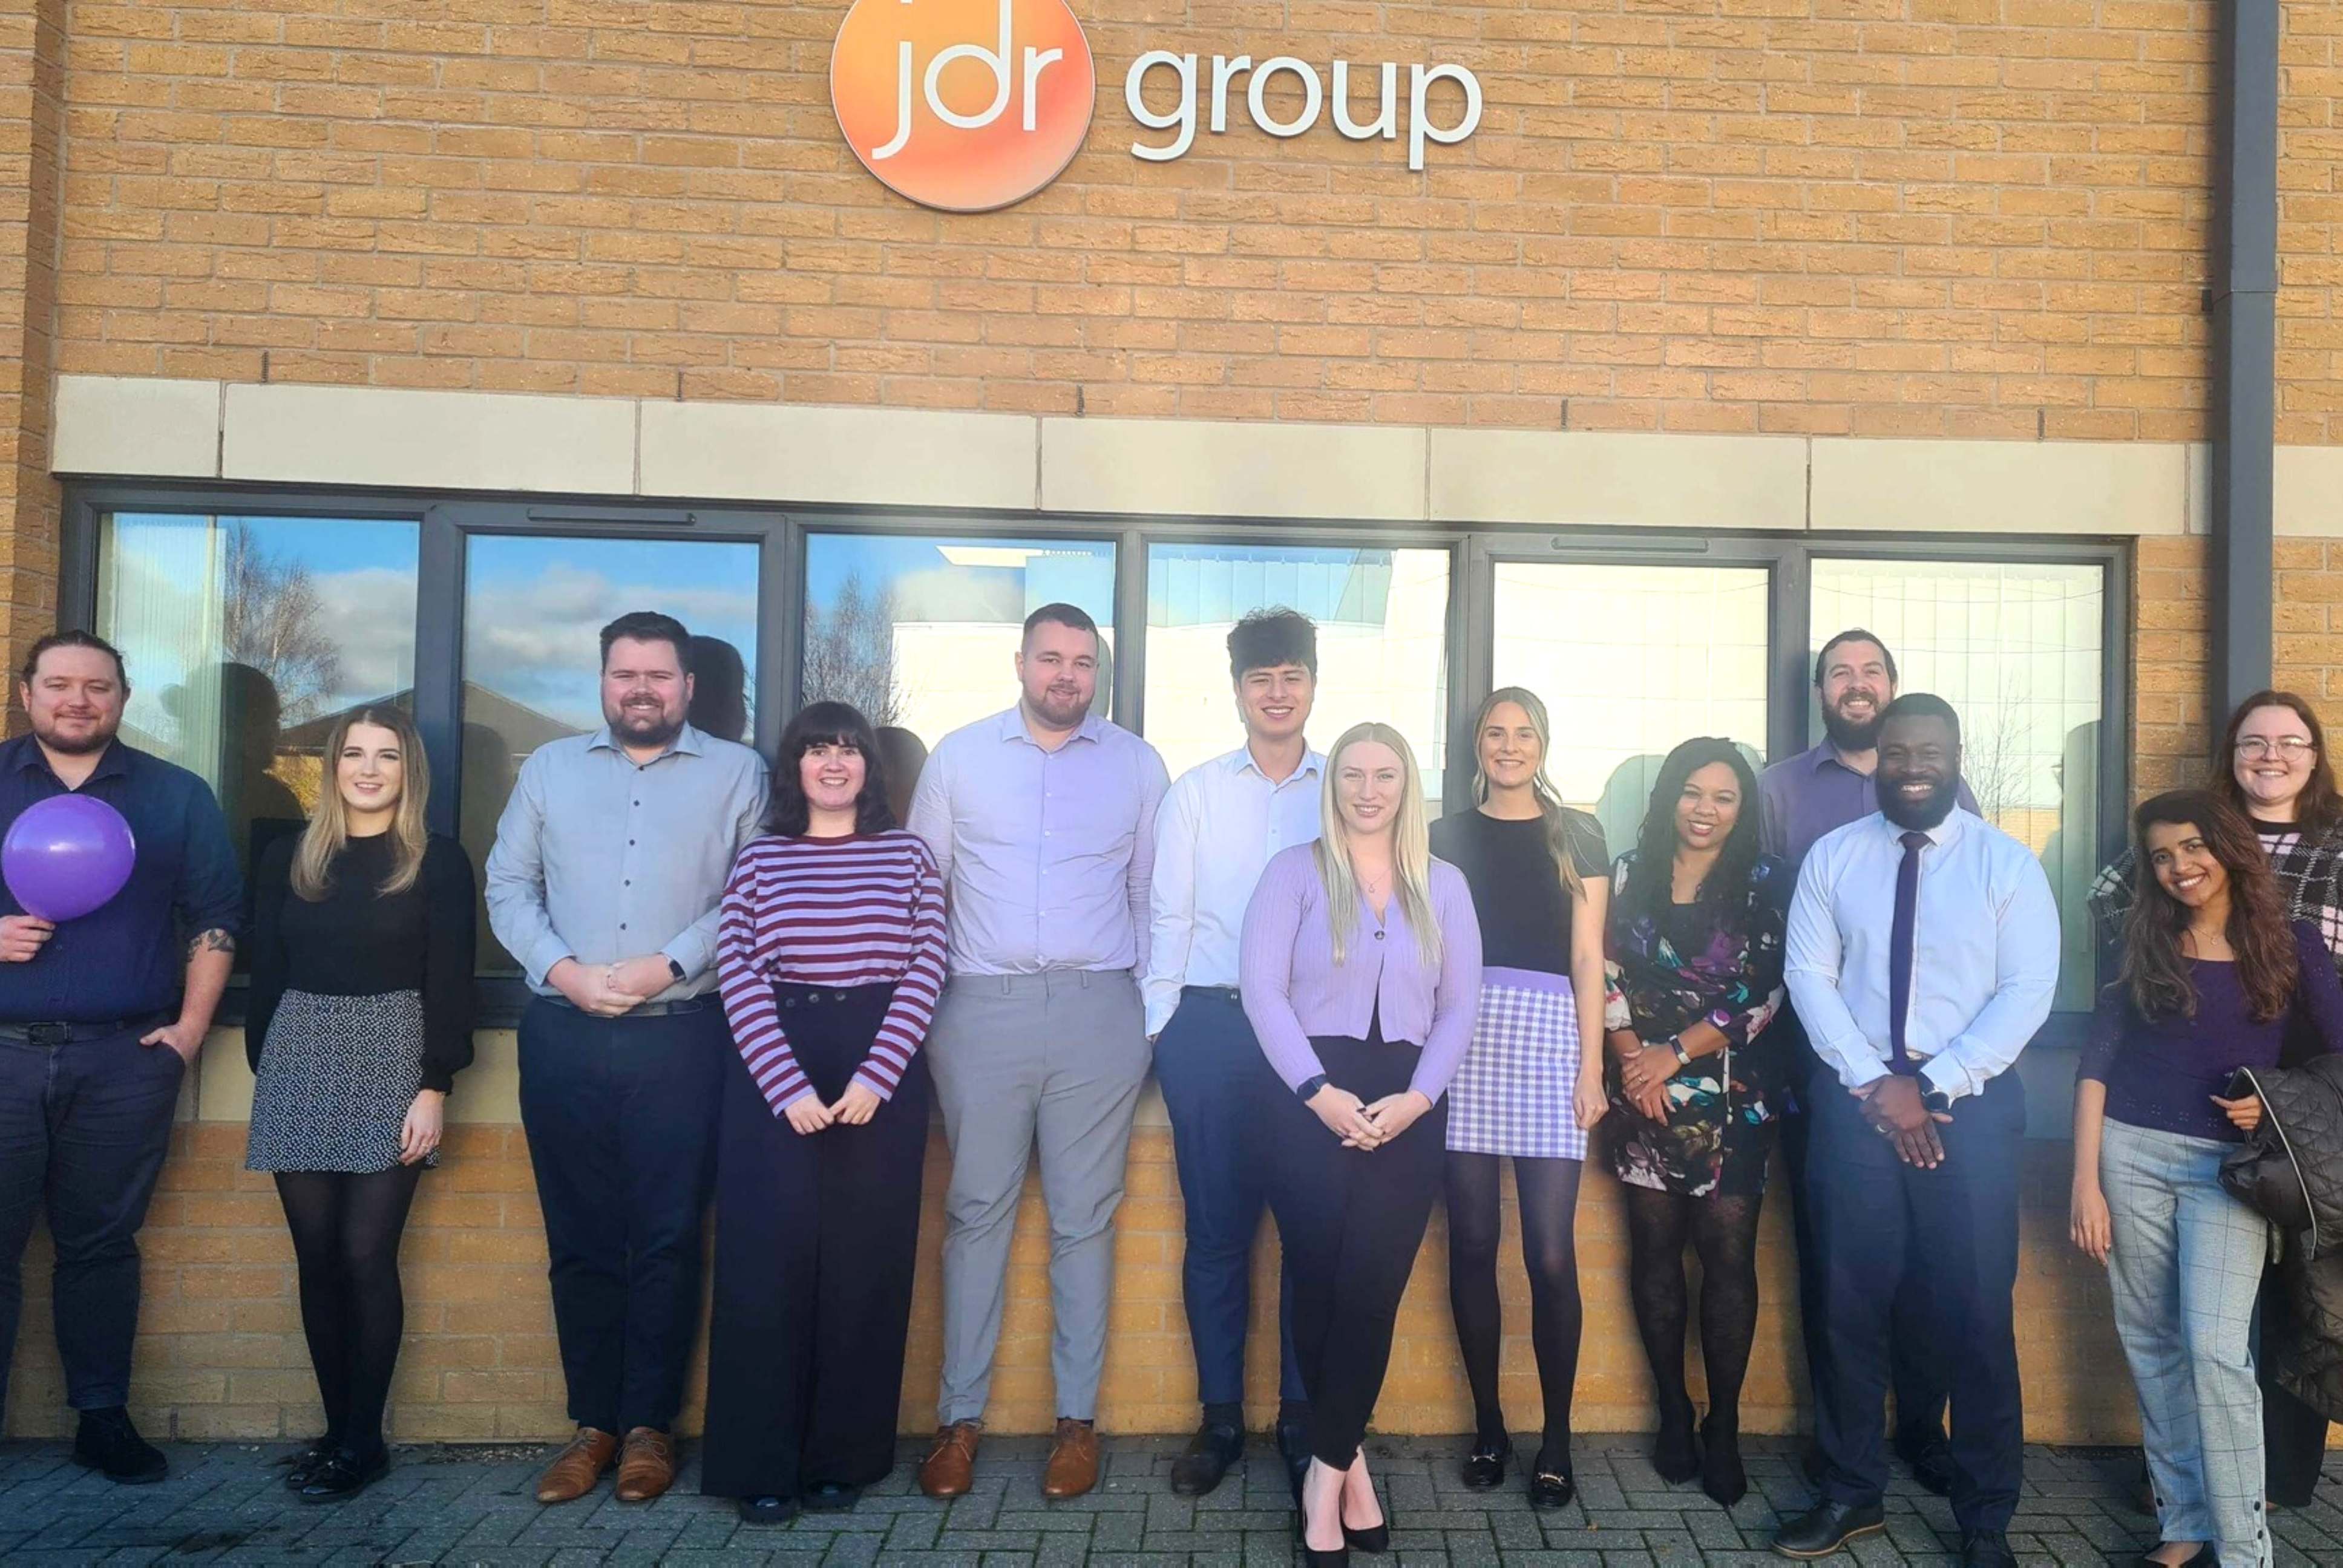 The JDR team standing outside of the office together, smiling